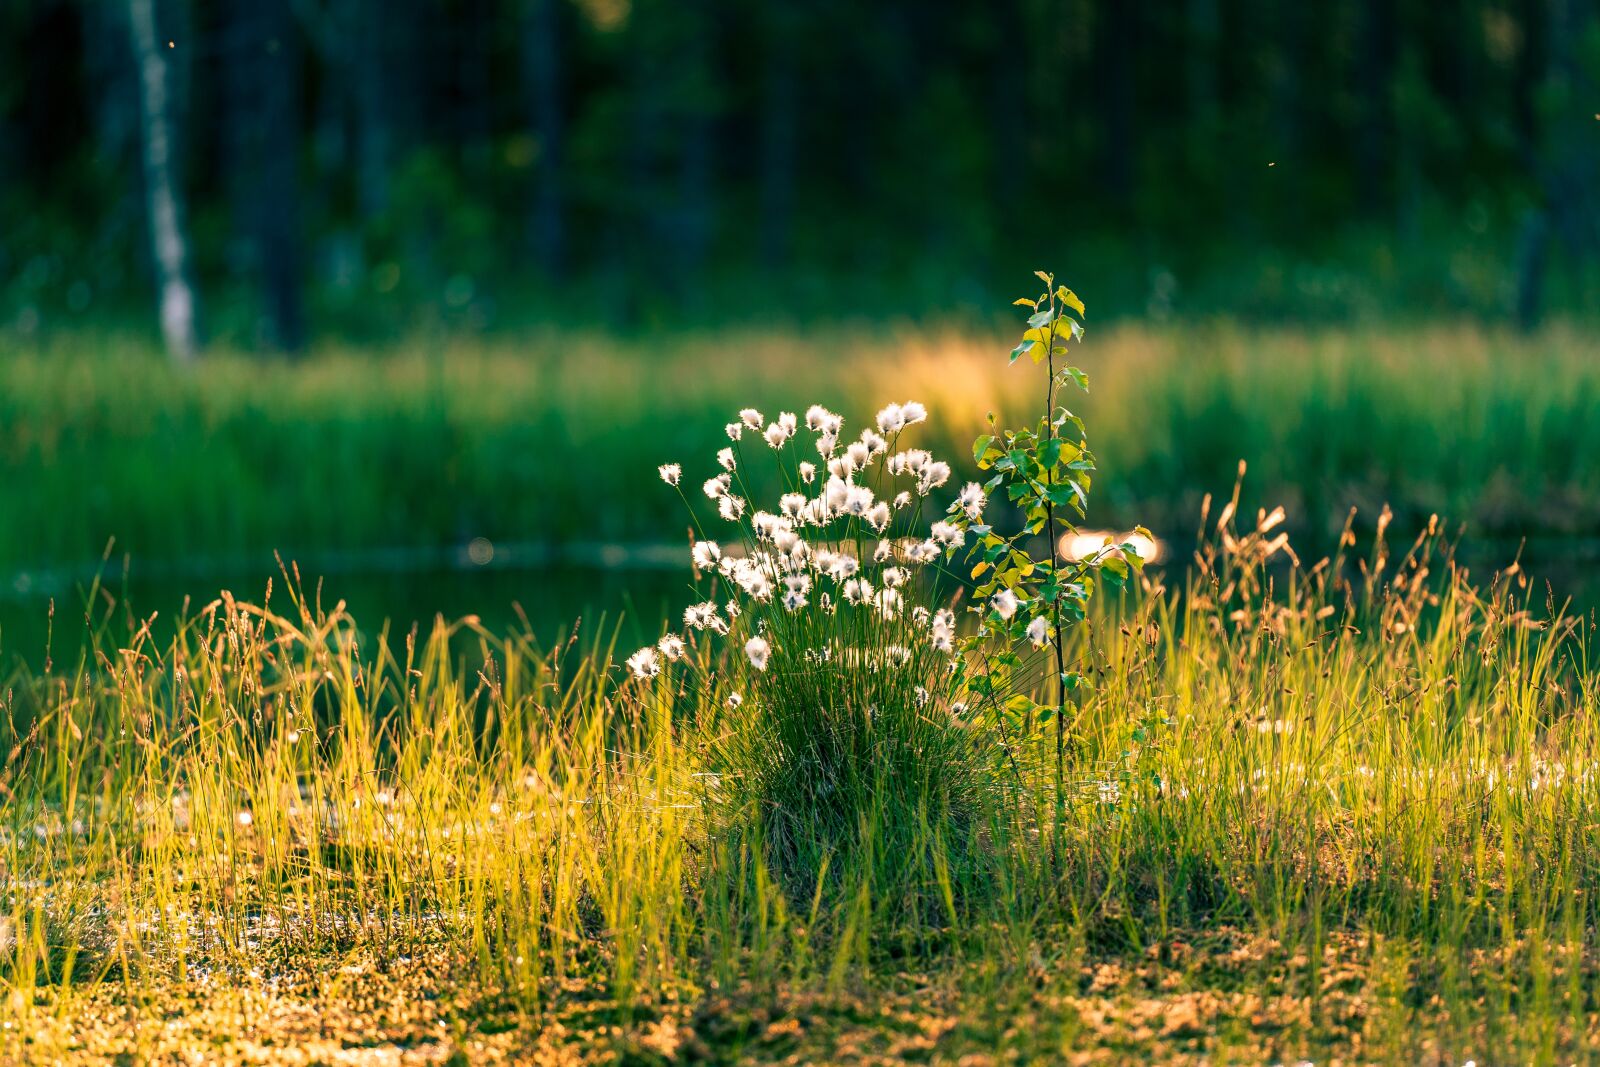 Sony a7 III sample photo. Cotton grass, swamp, evening photography